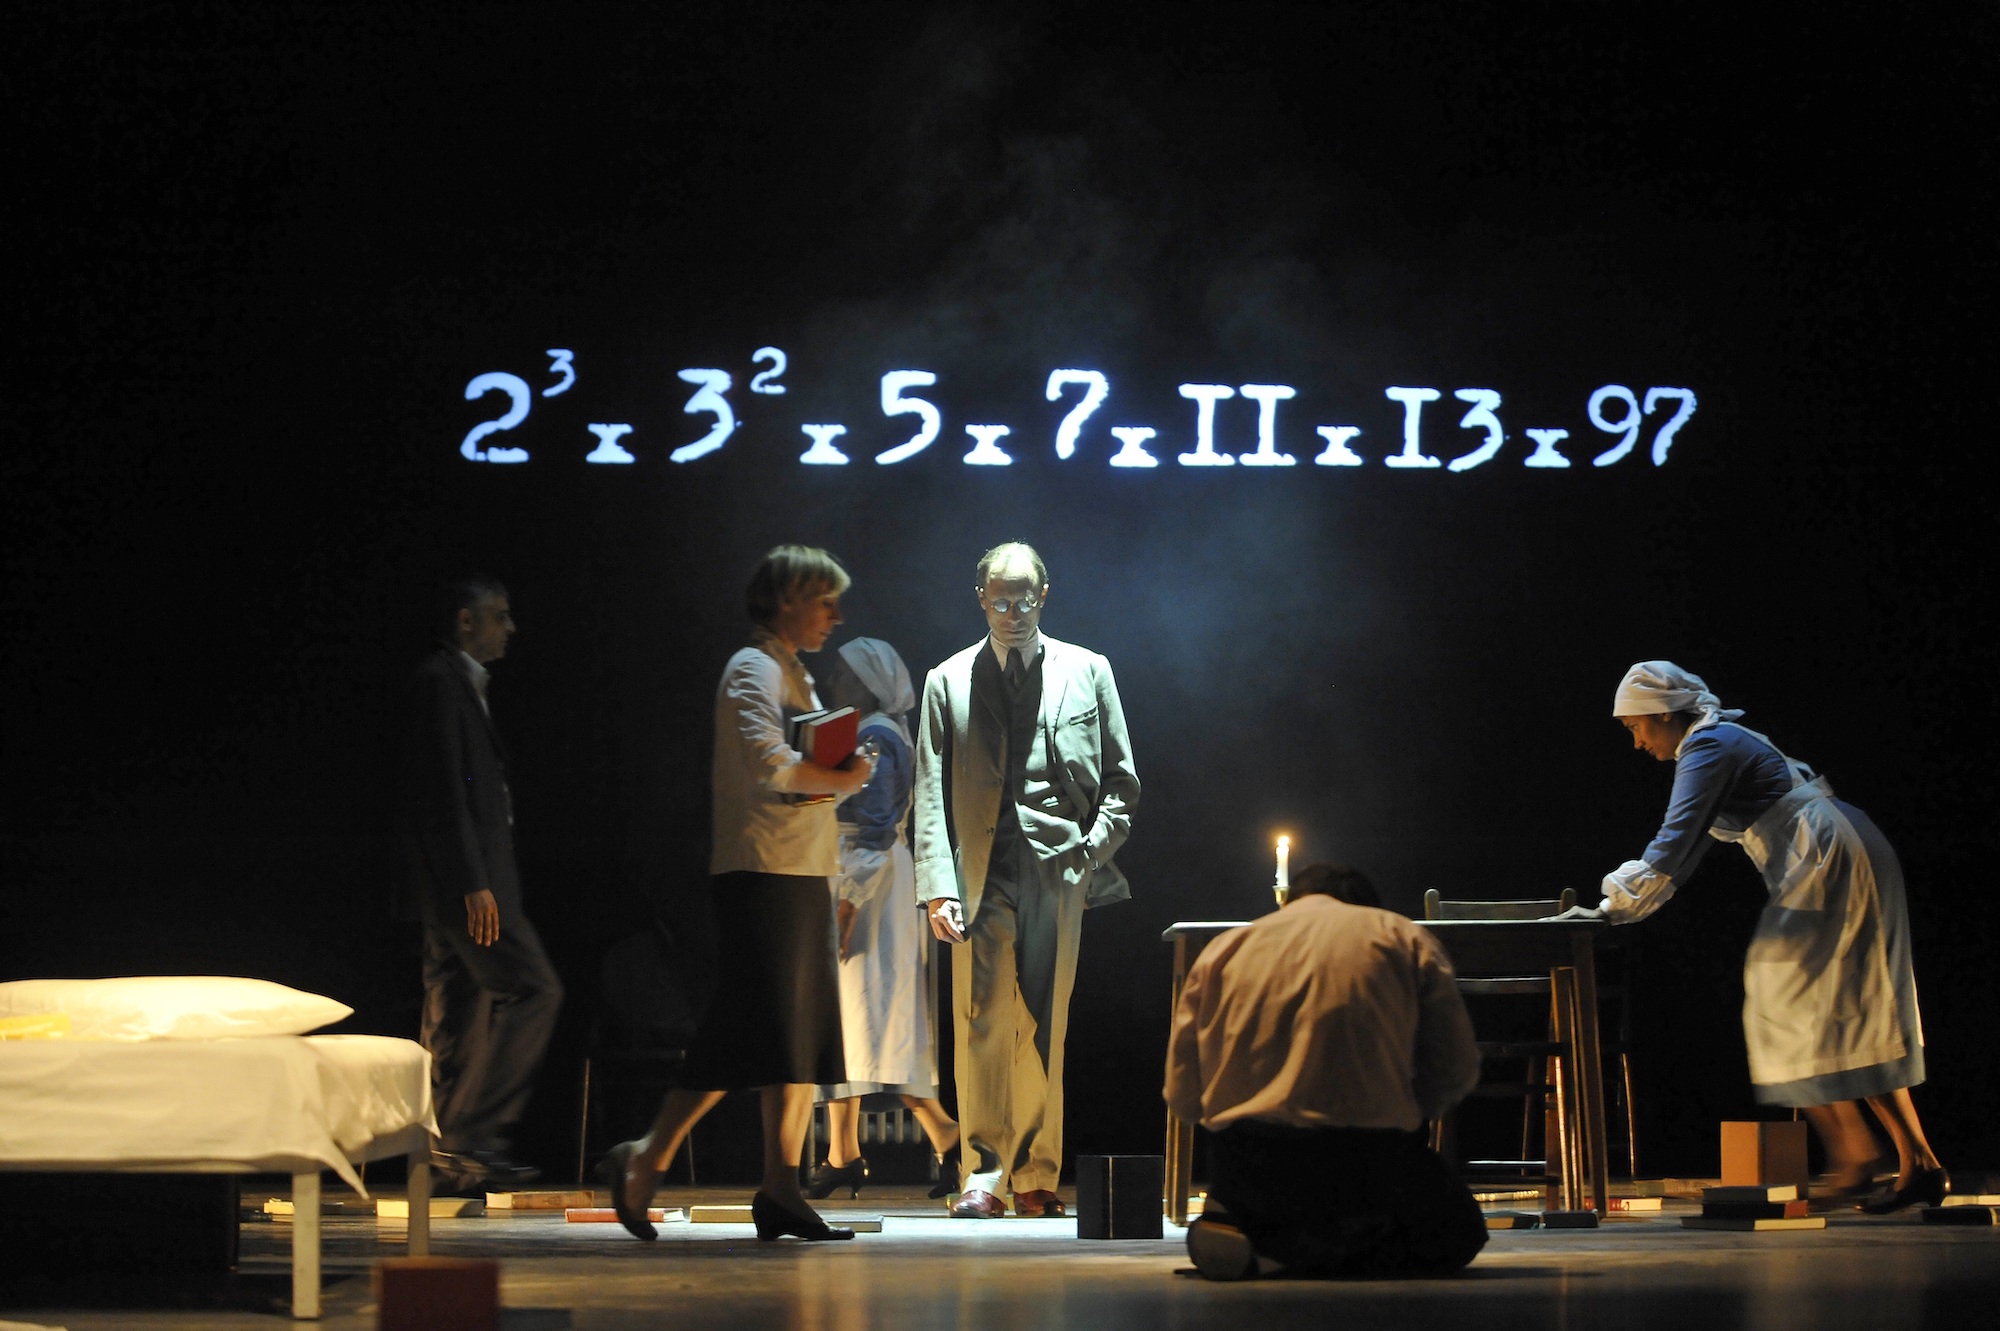 From A Different Number, multiple actors move across the stage, some dressed in office attire, some dressed as nurses, while a mathematical equation is projected on the black back wall.